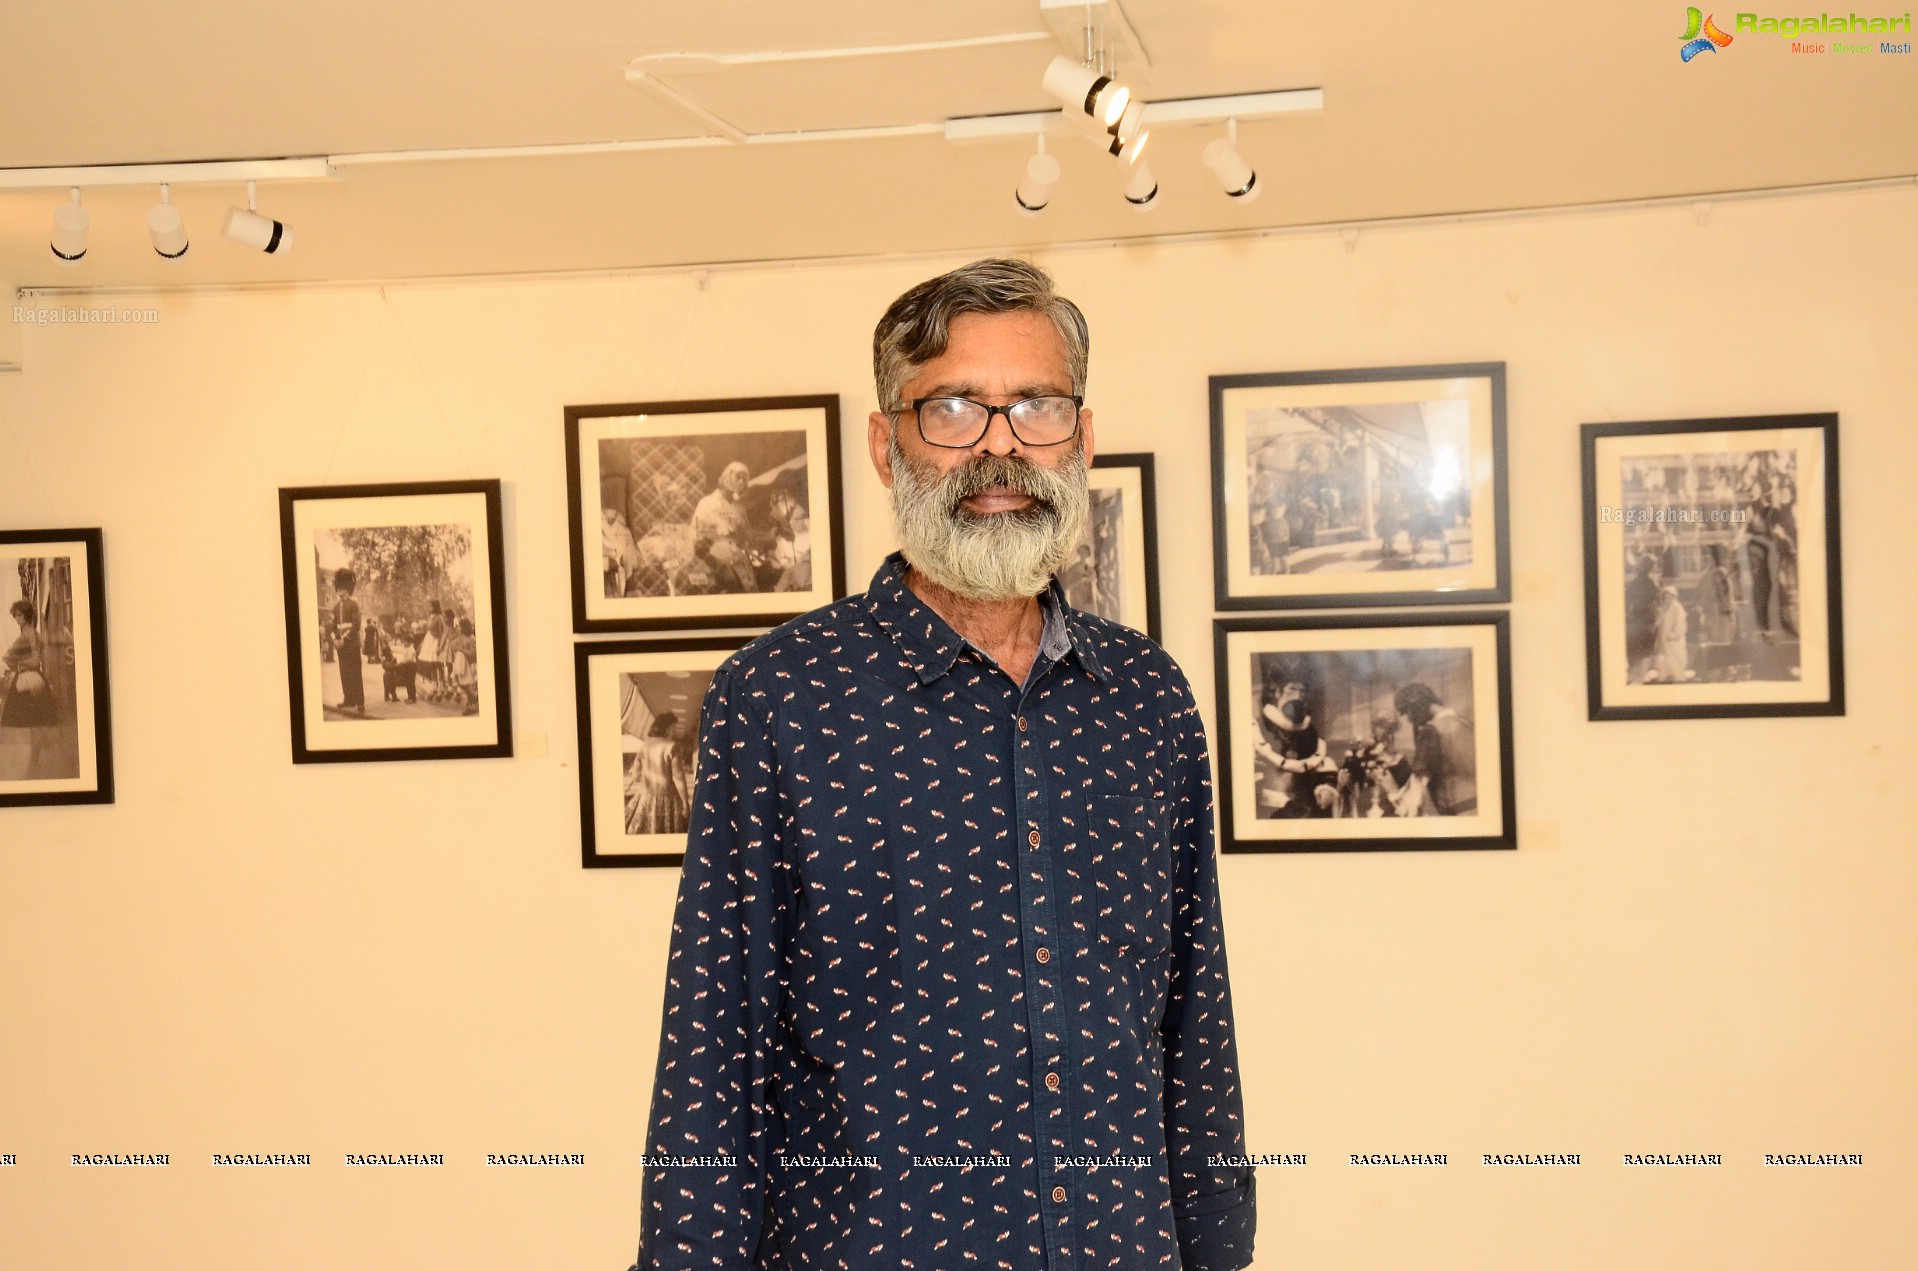 Shrishti Art Gallery Presents A Woman and her Camera - Photographs Exhibition